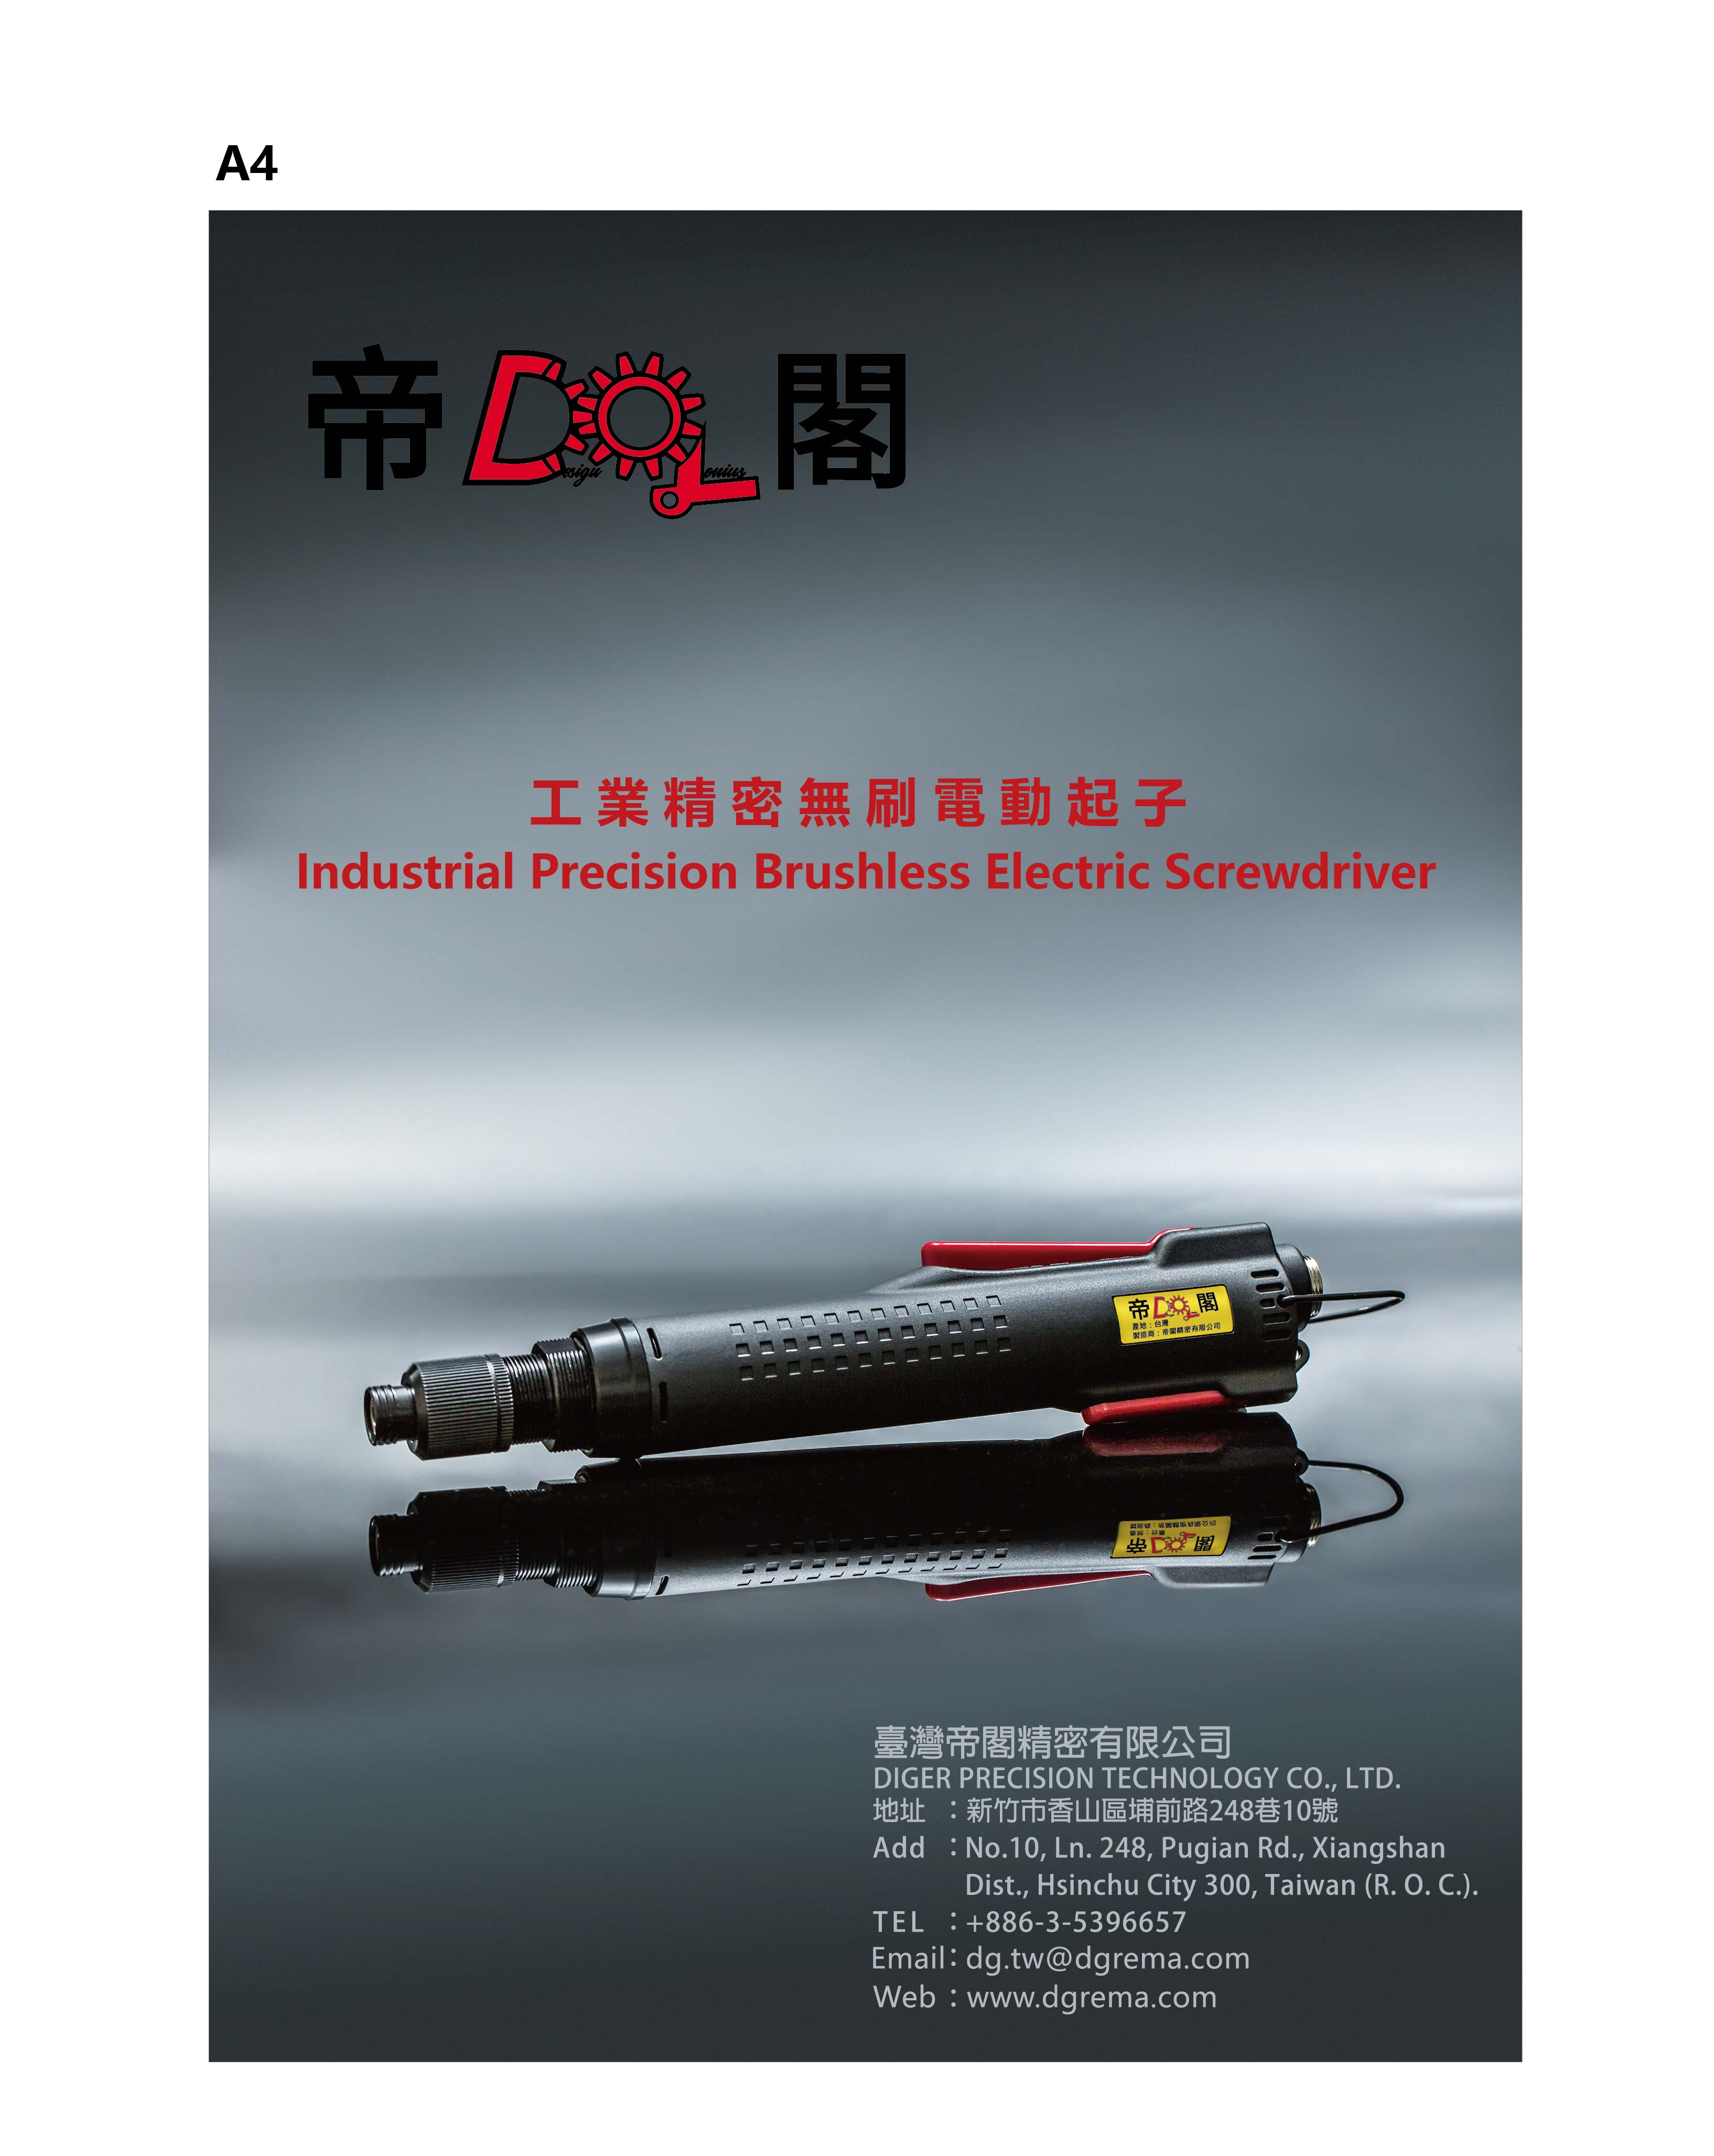 Industrial Precise Brushless Electric Screwdrivers